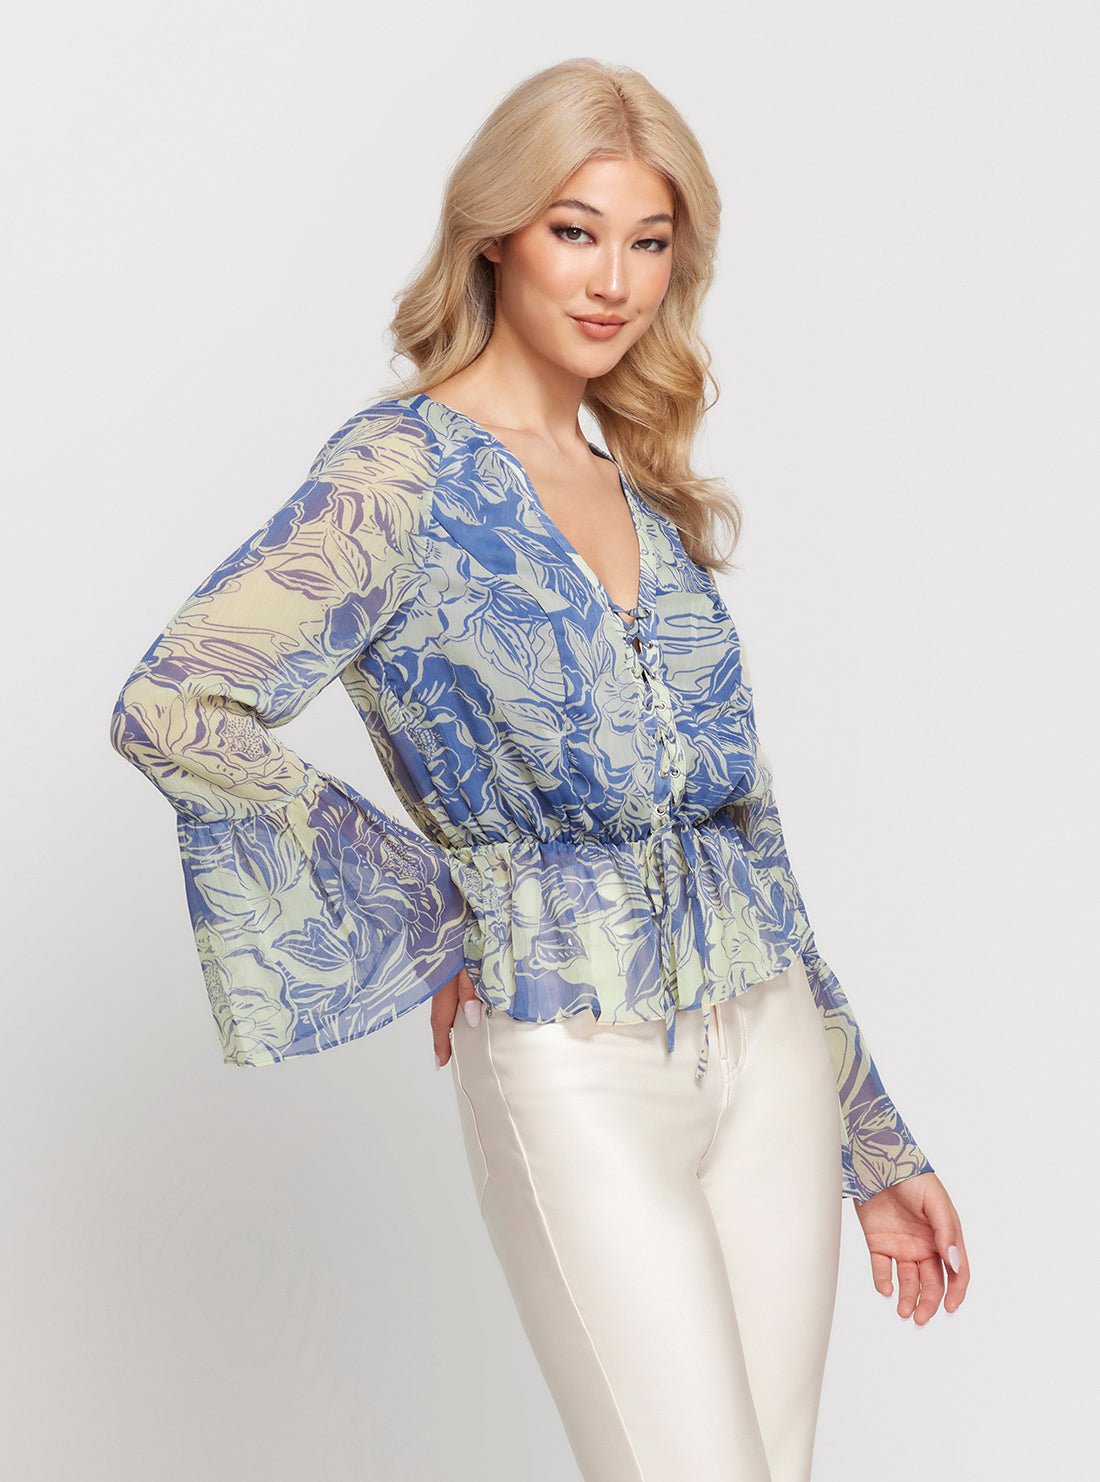 GUESS Blue Floral Print Long Sleeve Demi Top front view